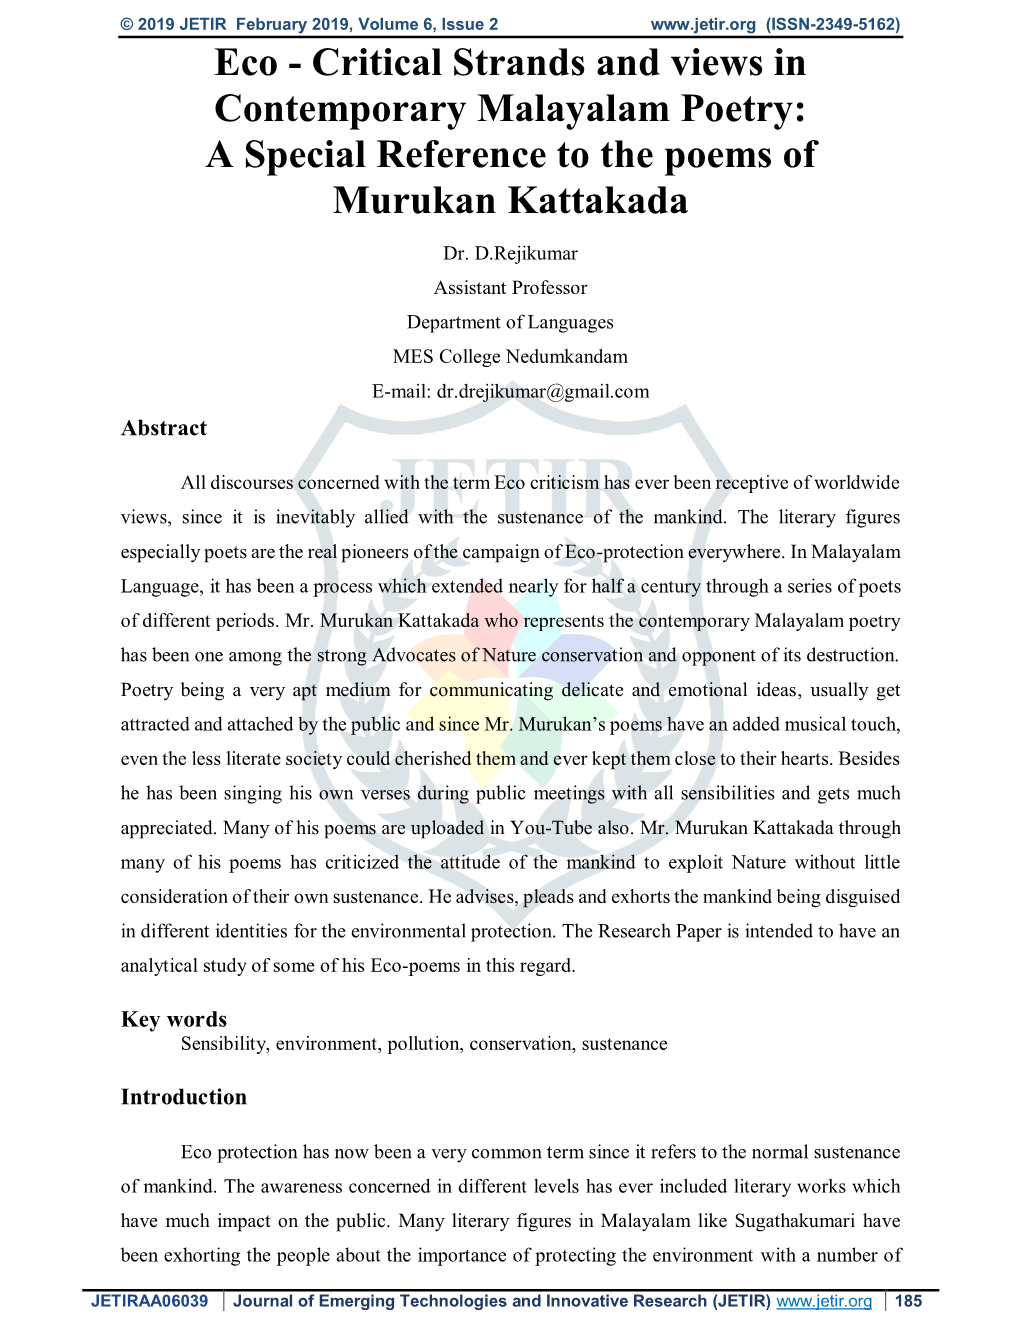 A Special Reference to the Poems of Murukan Kattakada